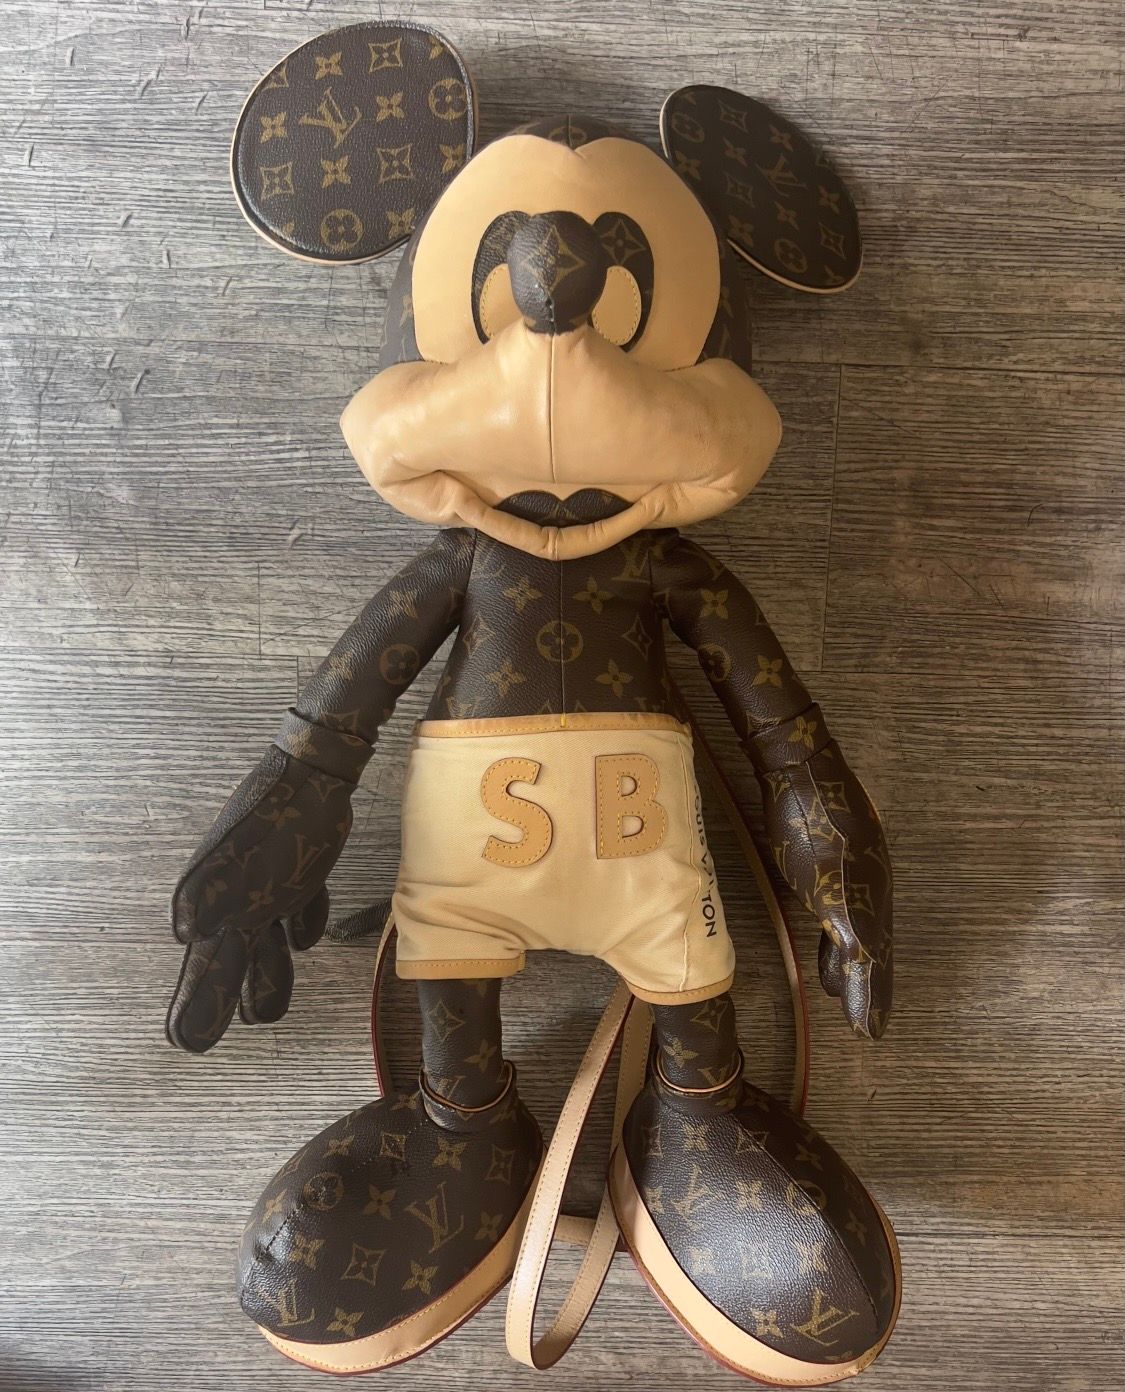 METCHA  Behind the Design: Sheron Barber's Mickey Mouse backpack